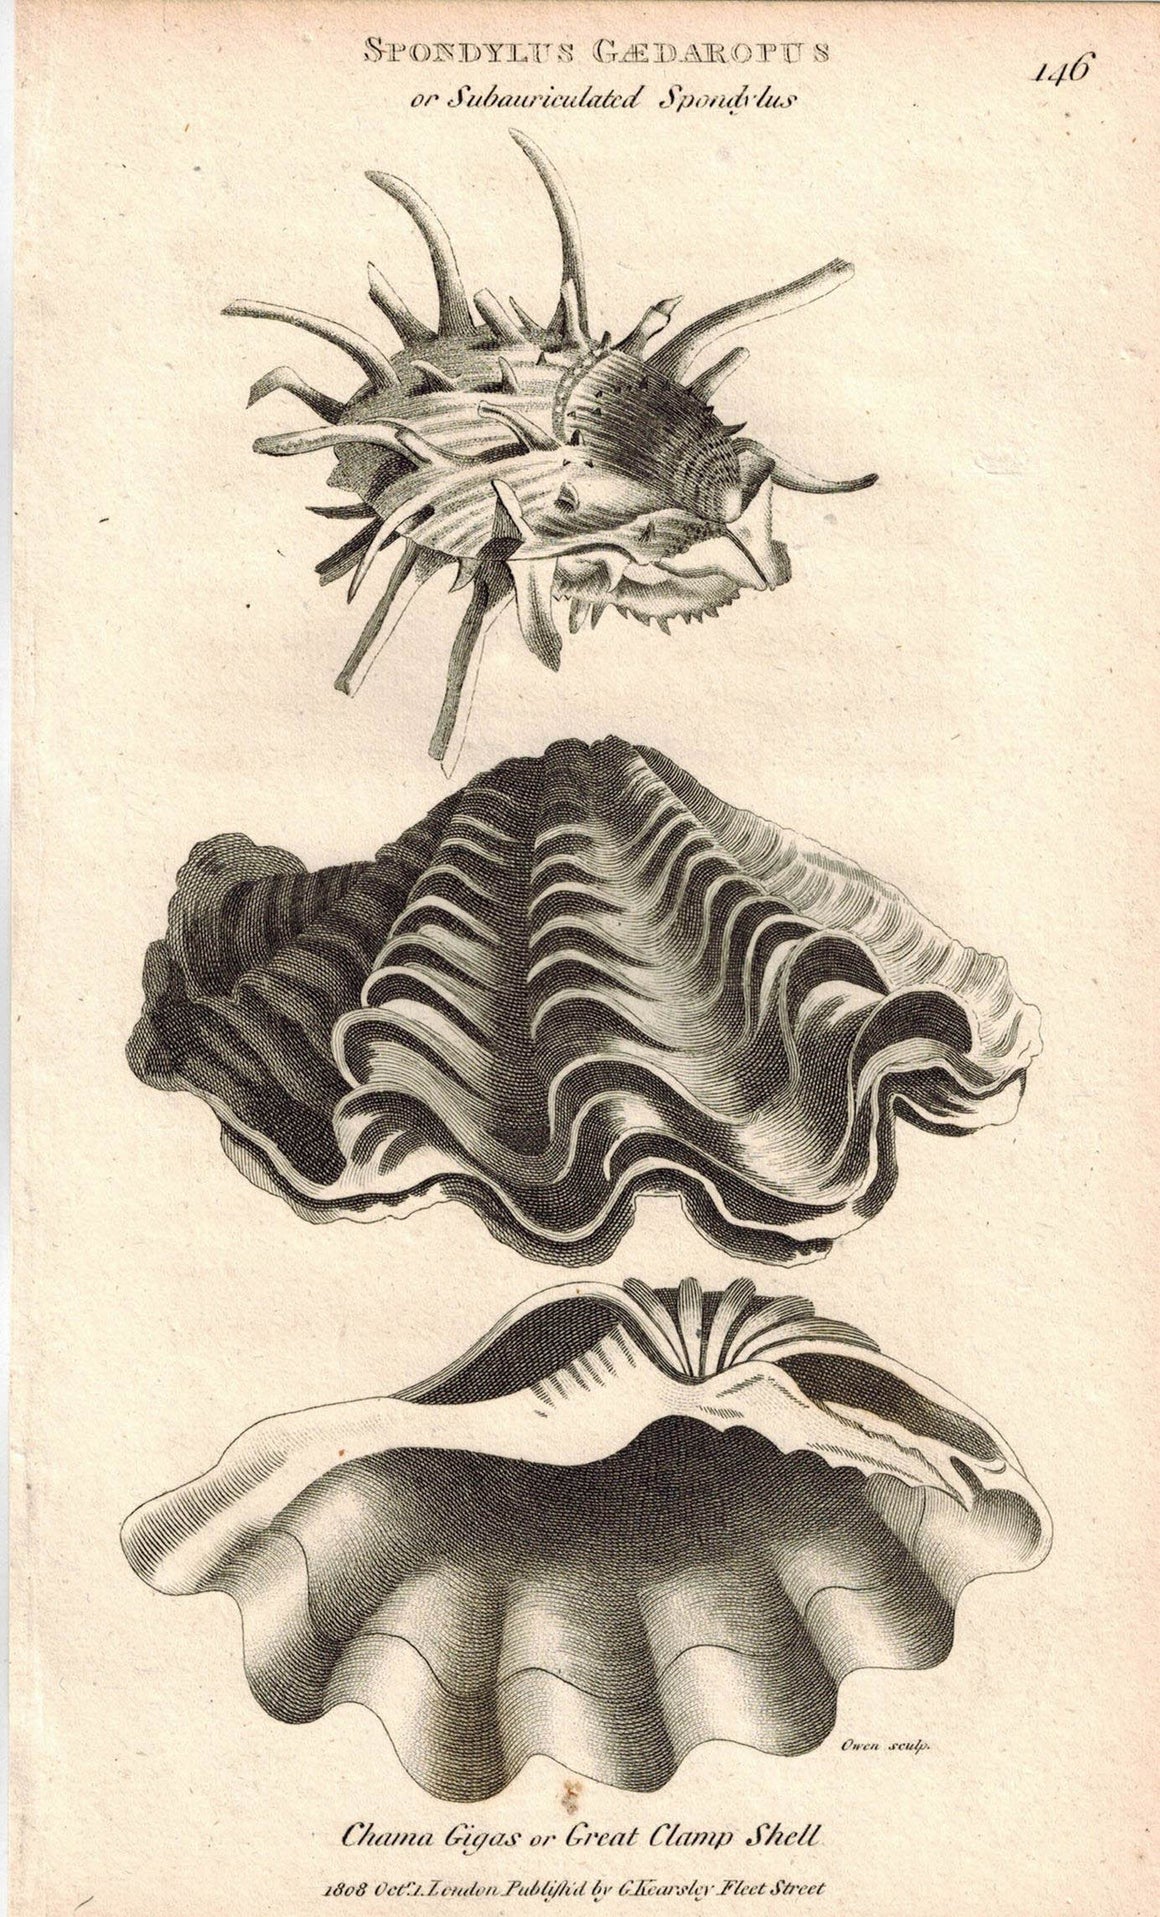 Subauriculated Spondylus & Great Clamp Shell 1809 Original Engraving Shaw Print